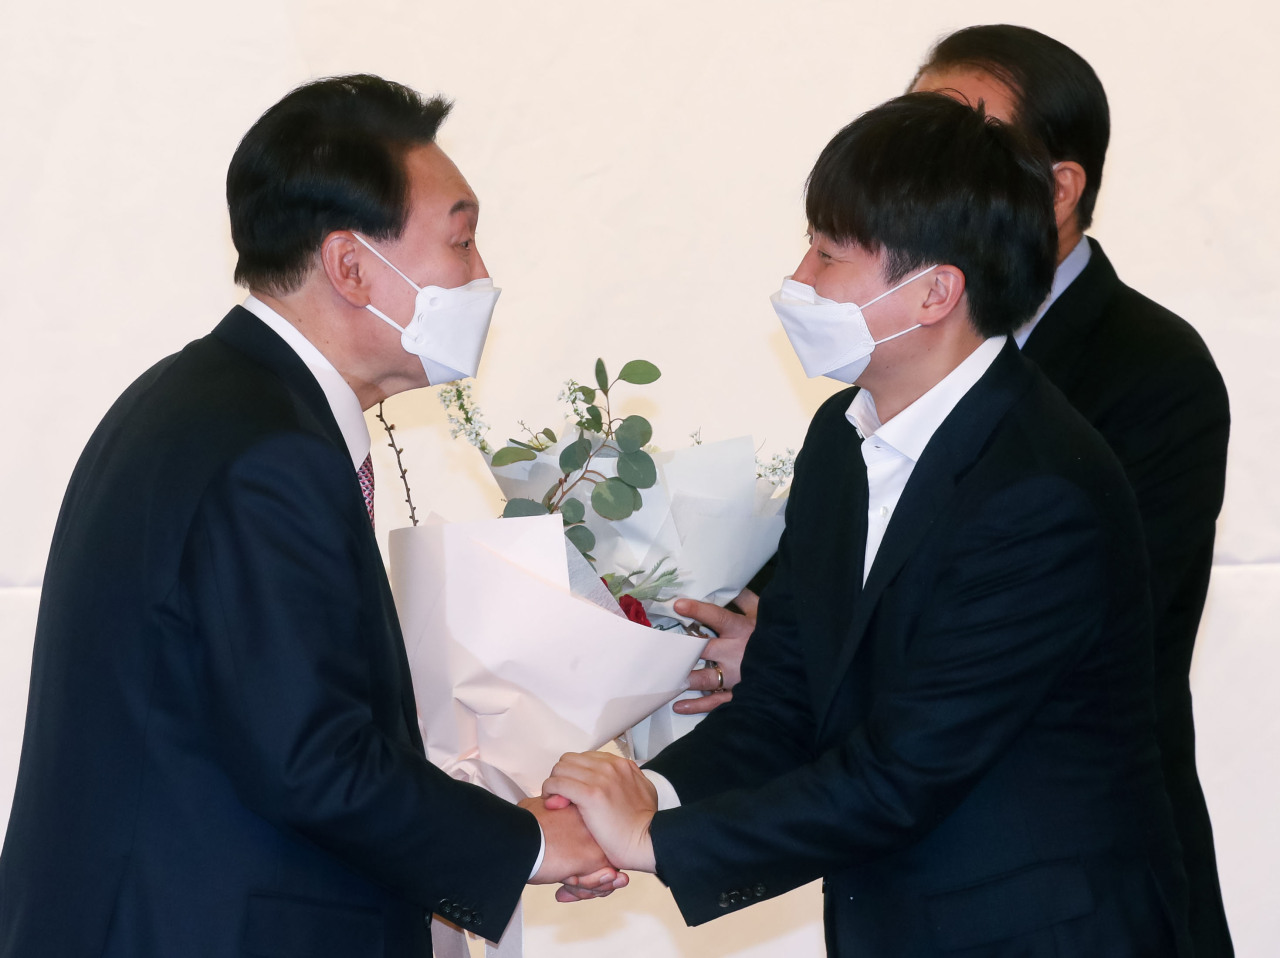 President-elect Yoon Suk-yeol (left) and People Power Party chief Lee Jun-seok exchange a handshake on March 10, a day after the election, at the National Assembly building in central Seoul. (Yonhap)